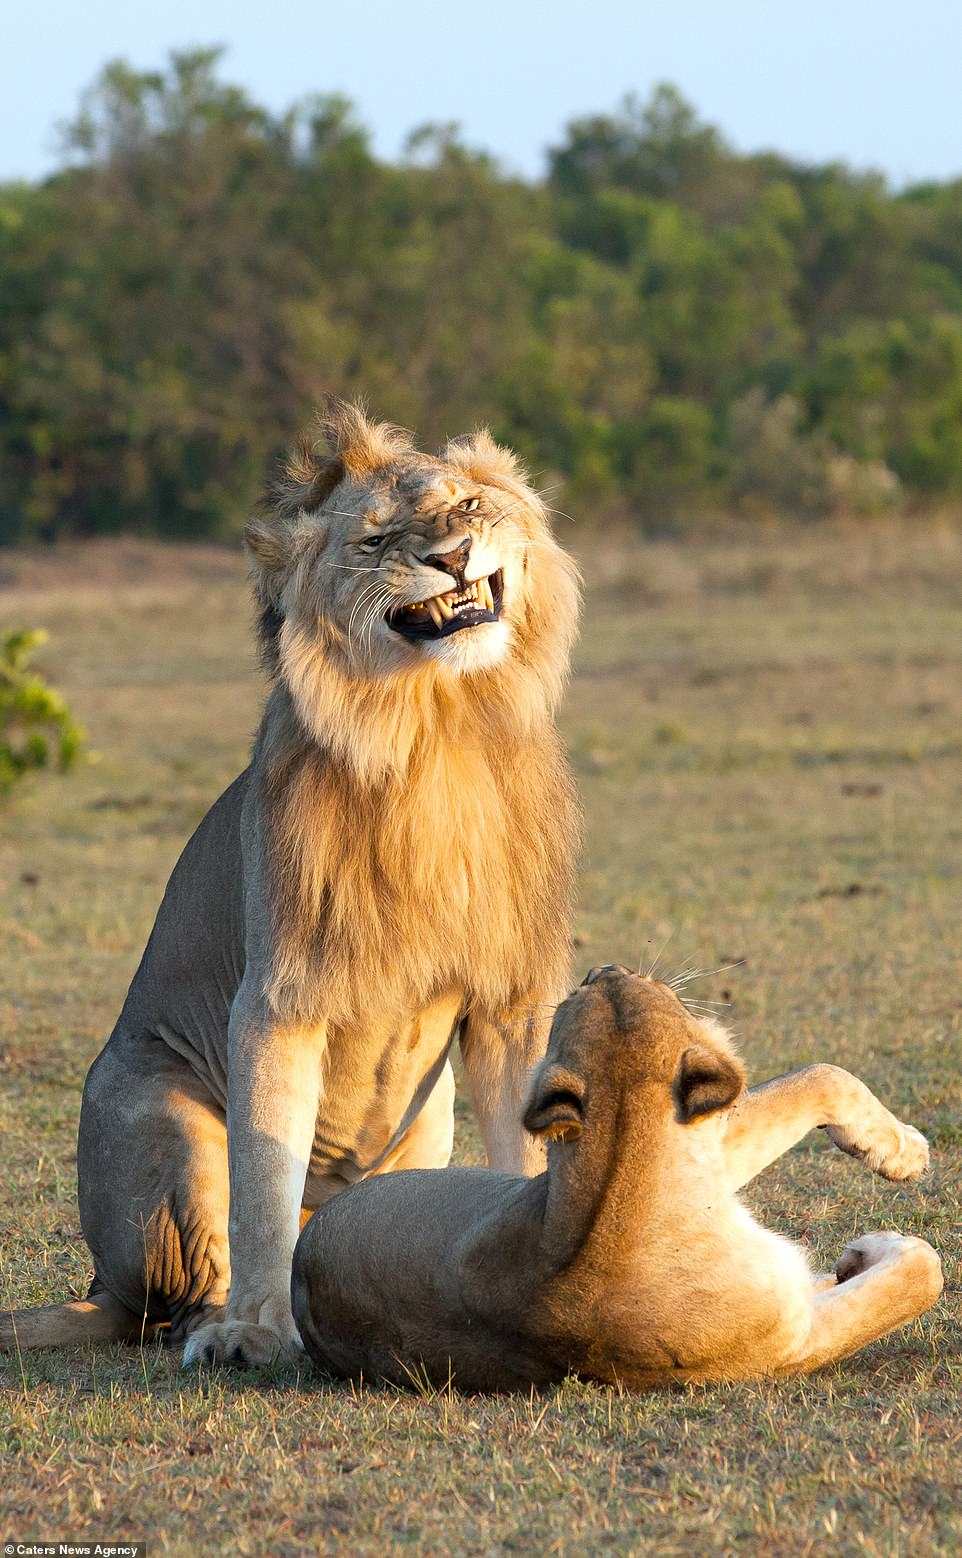 The lion bears its teeth as it sits at the rear of the lioness on the grassy plains of the Maasai Mara National Reserve in Kenya; although mating itself takes only a few seconds, it is repeated about every 20 minutes